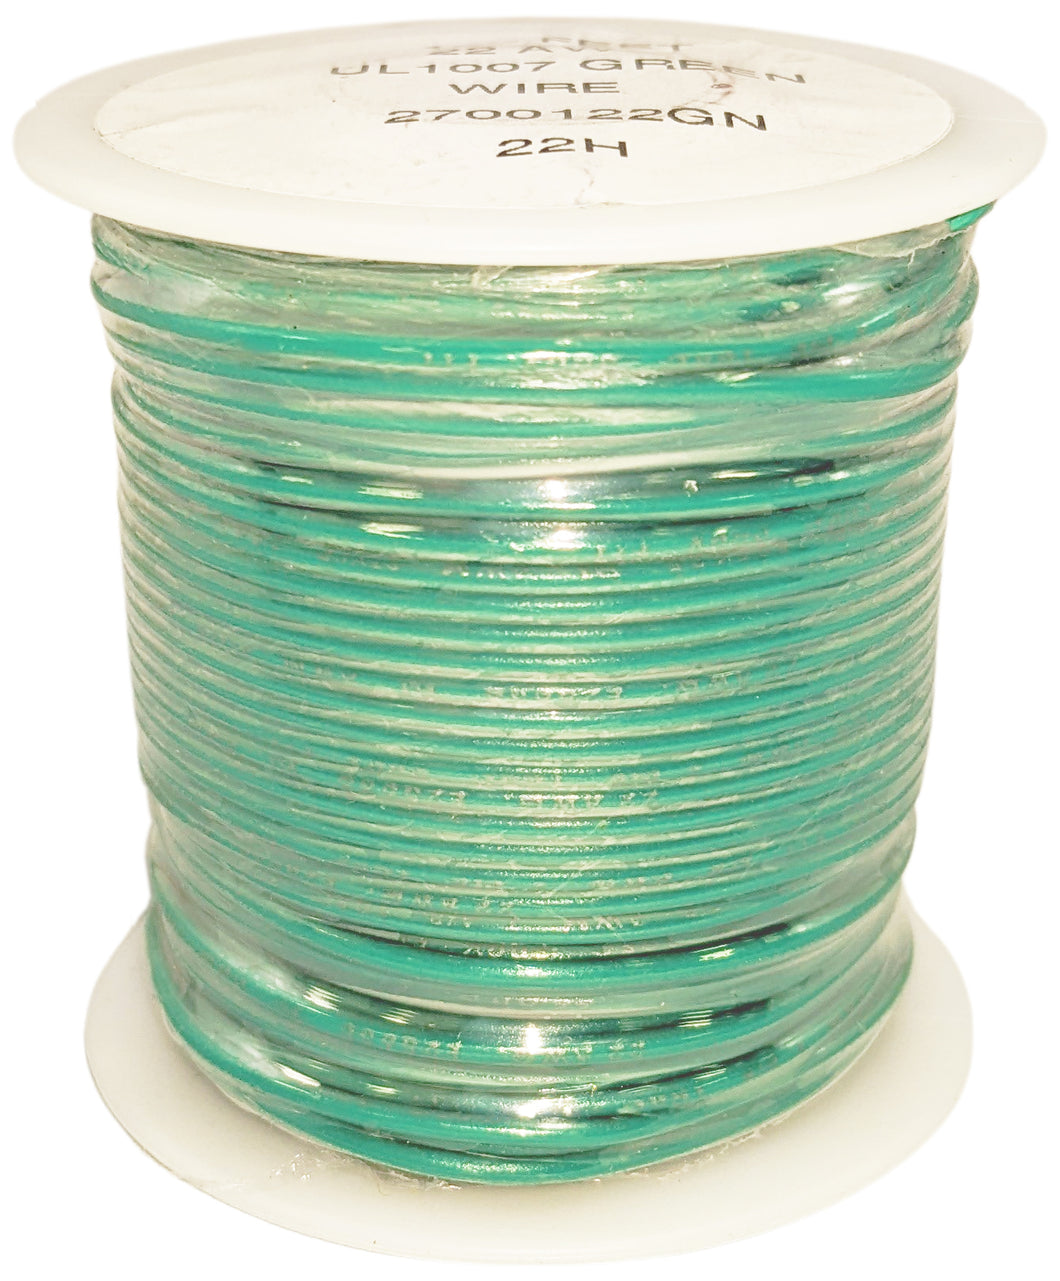 Solid Hook Up Wire - 22 Gauge, 100 Foot Spool - Green (Shade May Vary)